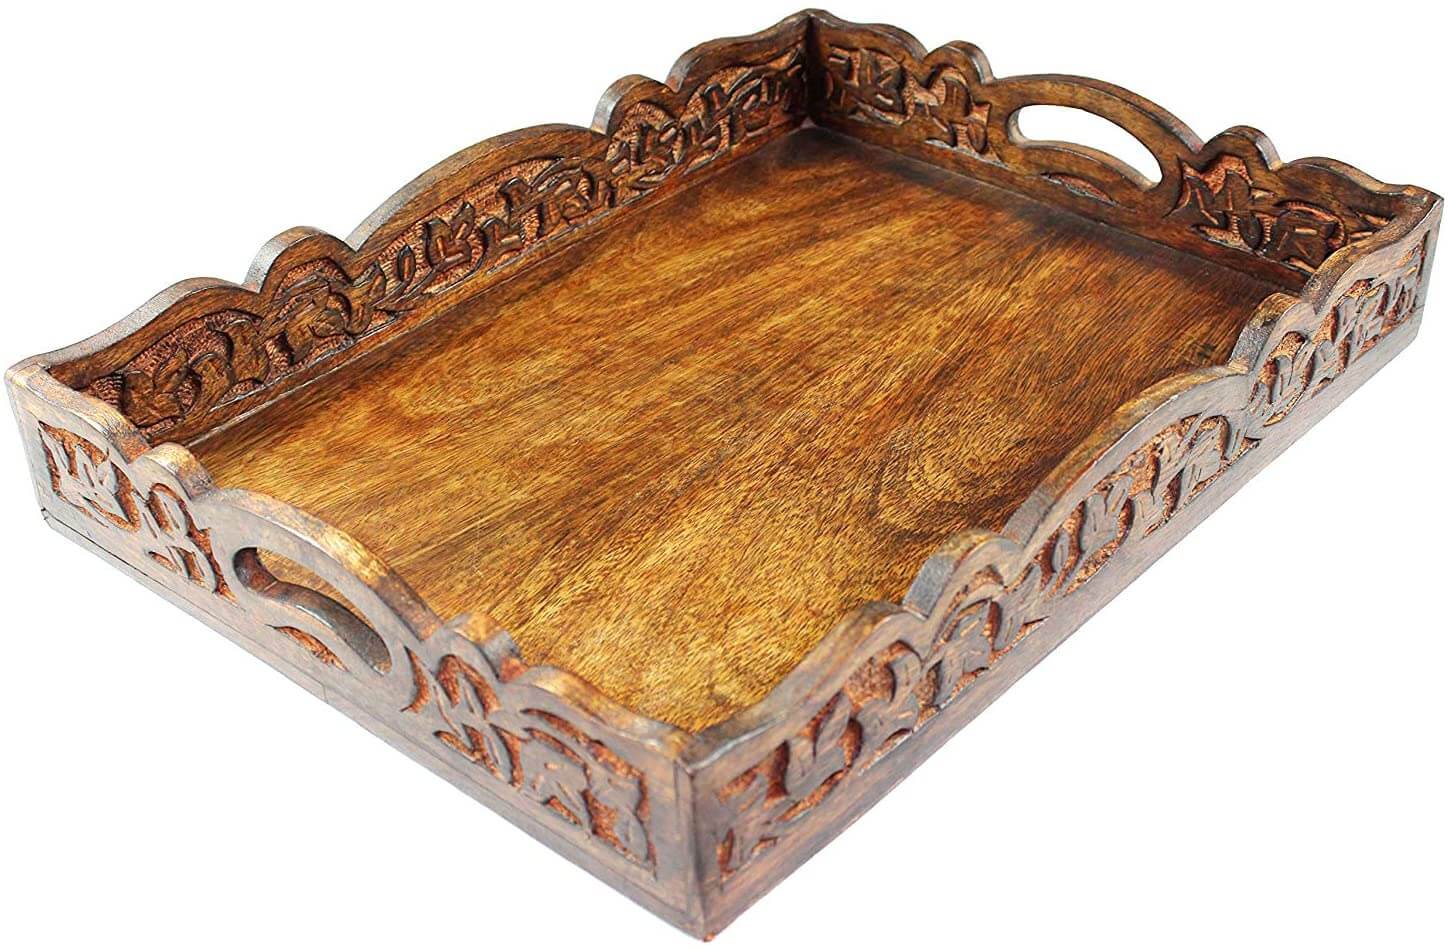 Intricately Detailed and Classy Wooden Decorative Tray